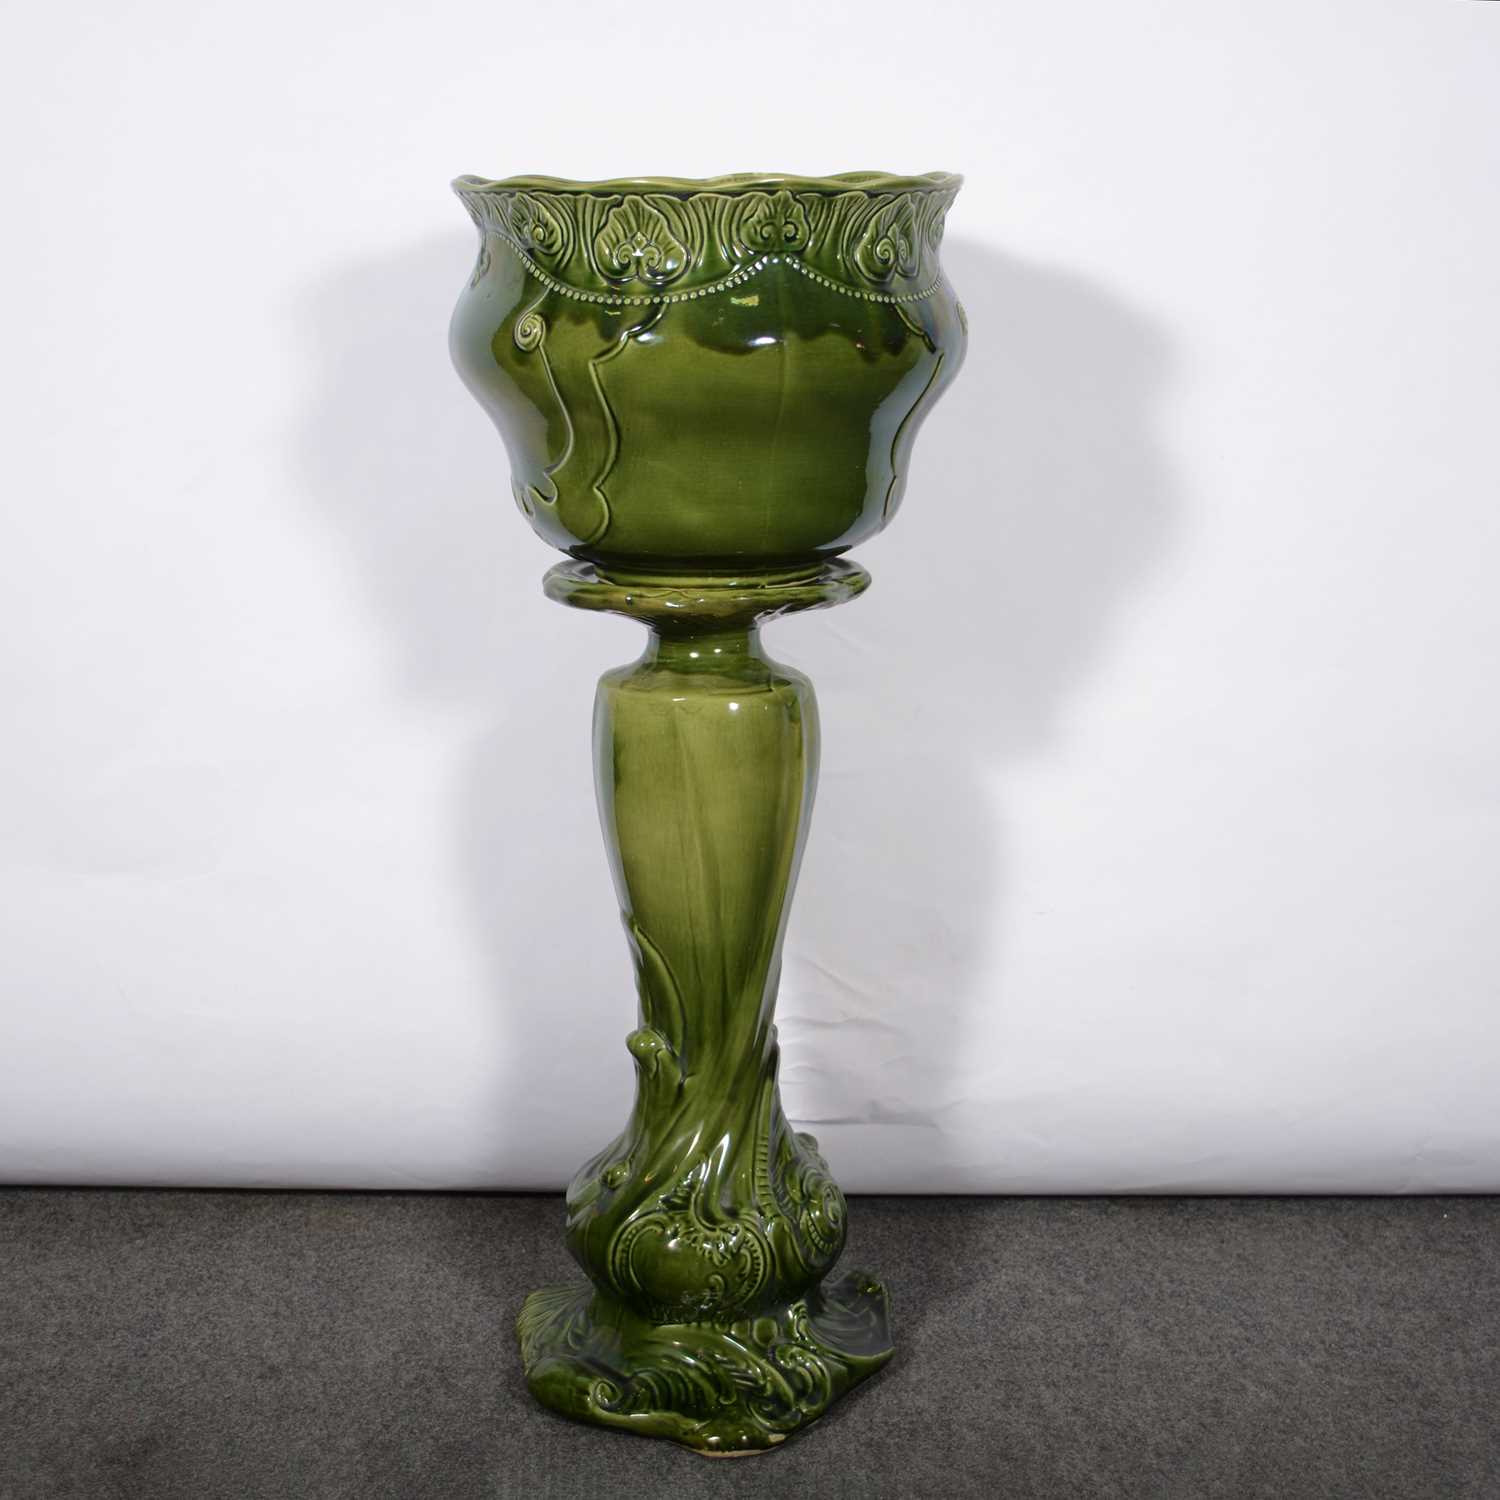 Lot 594 - Staffordshire pottery jardiniere and stand